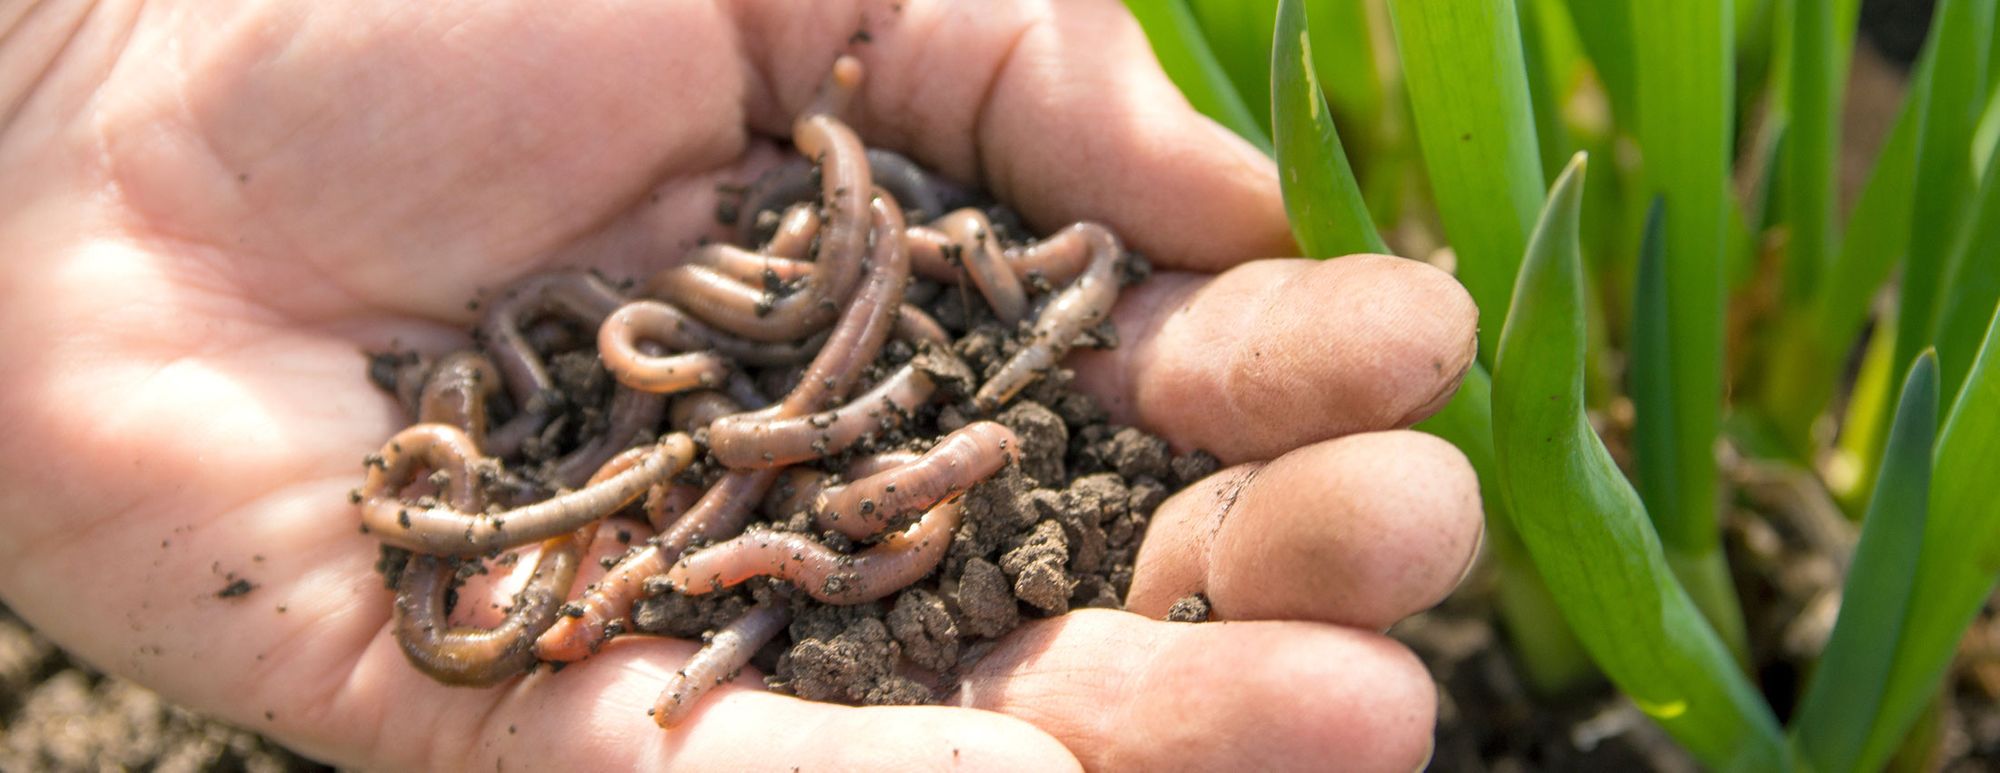 Bringing Back The Earthworms – Paul’s Story